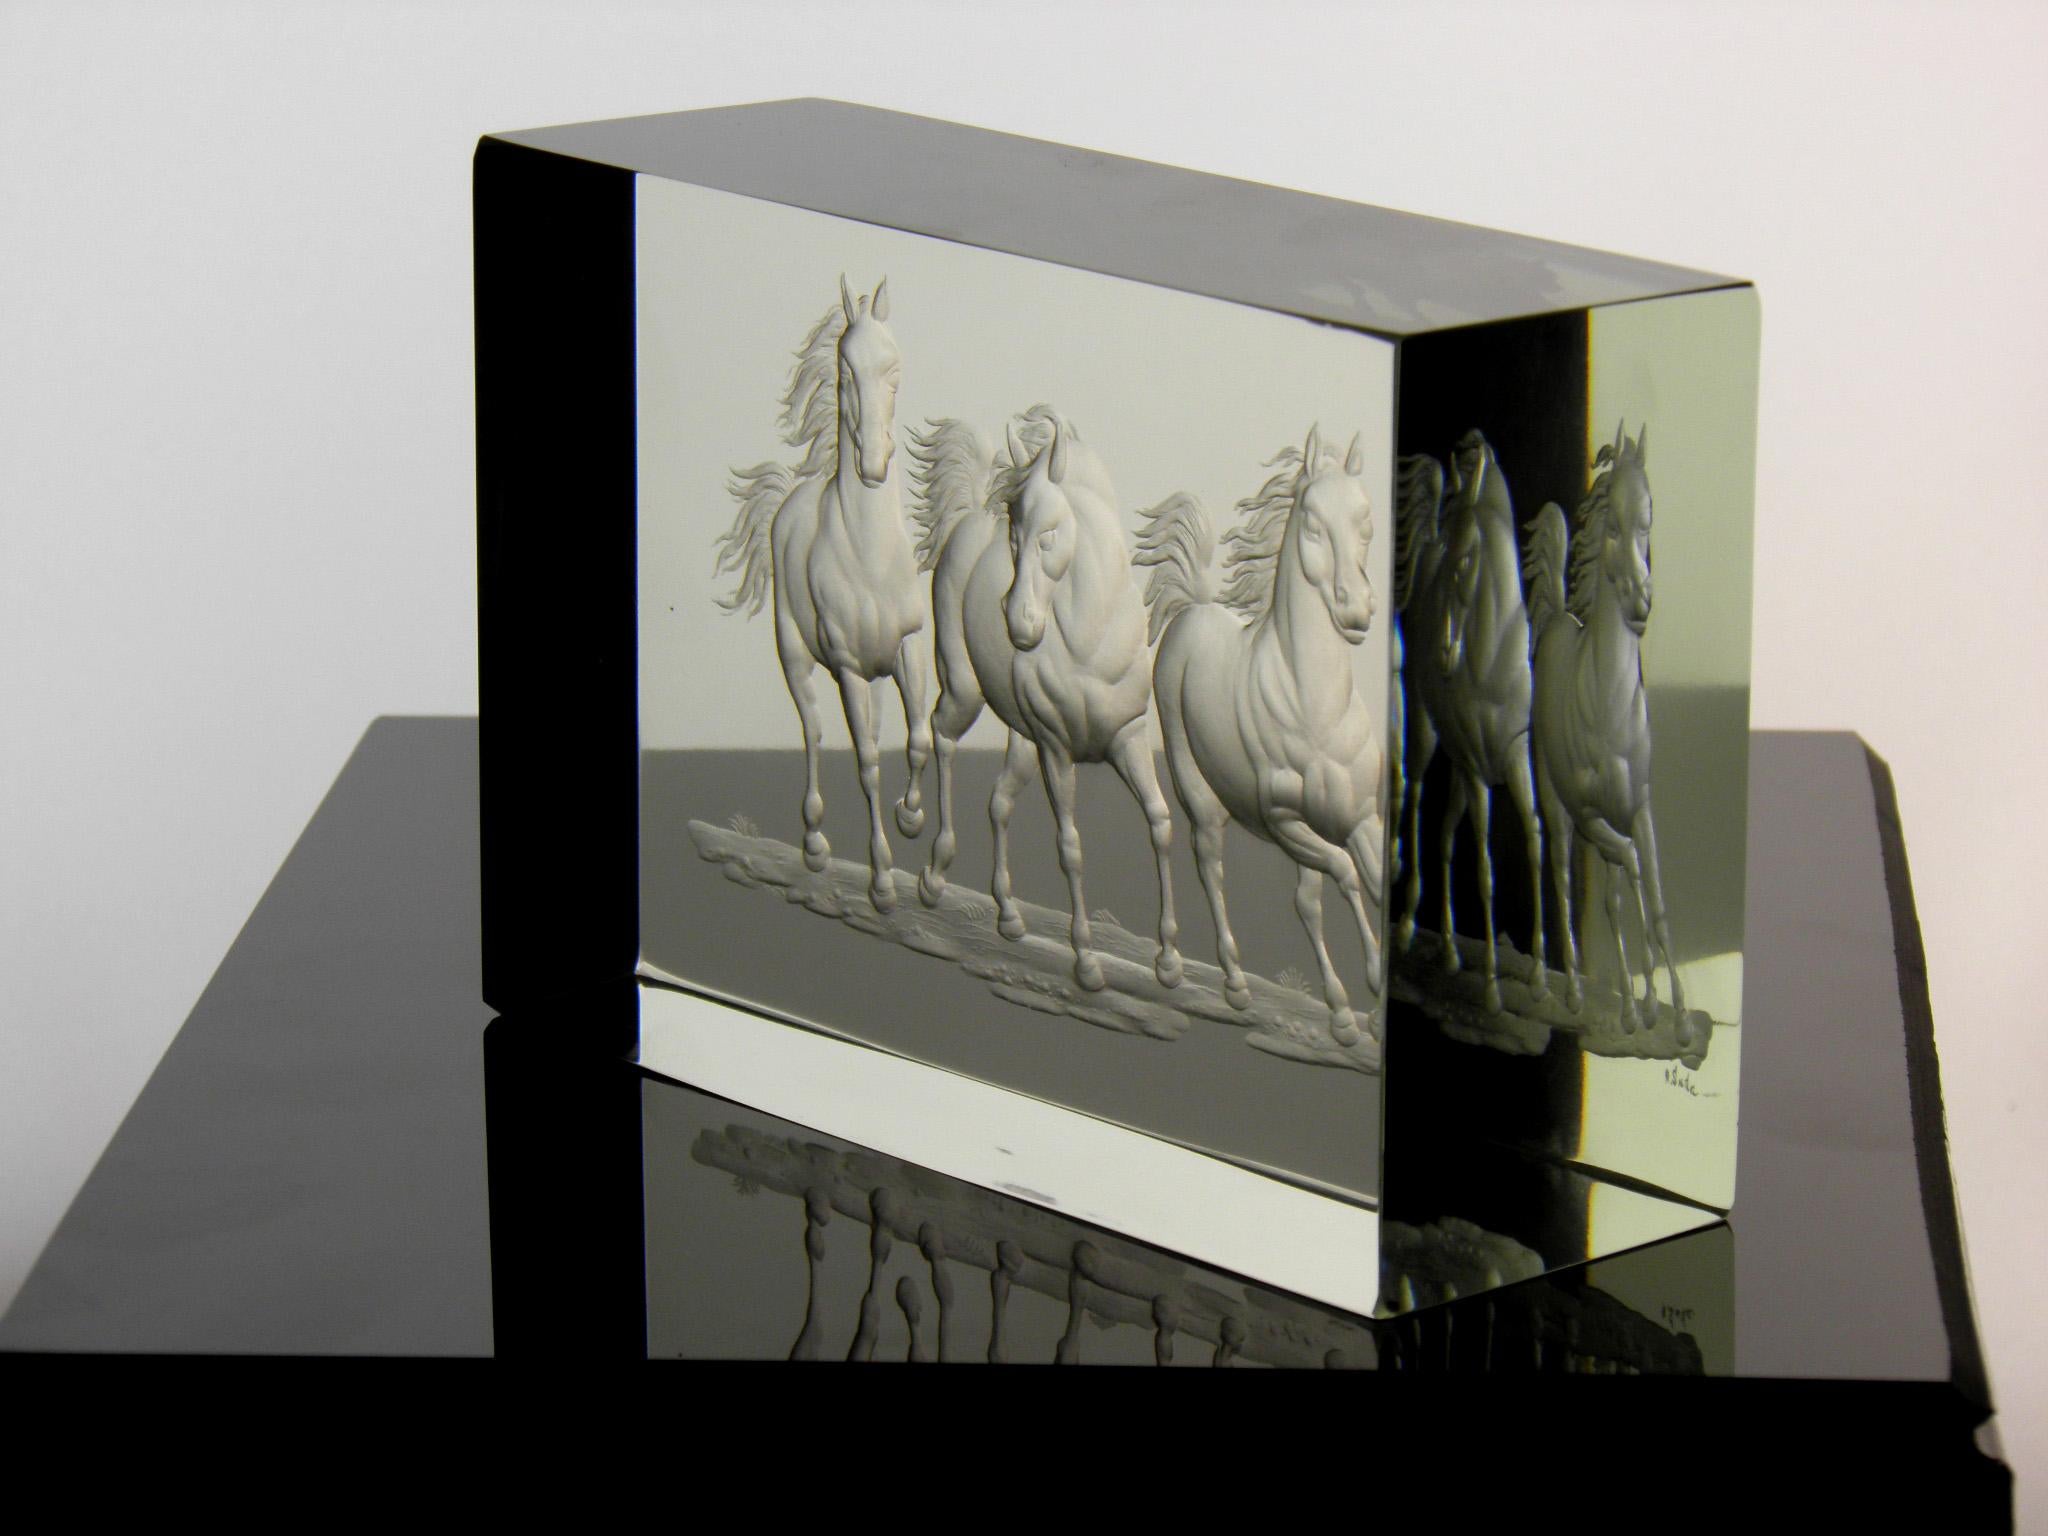 Optical glass block horse motive handcut Bohemian European
Optical glass block characterized by absolute purity, handcut and polished. Engraving made by the old technique of copper engraving, Horses on the run, Custom production. Gift for lovers or